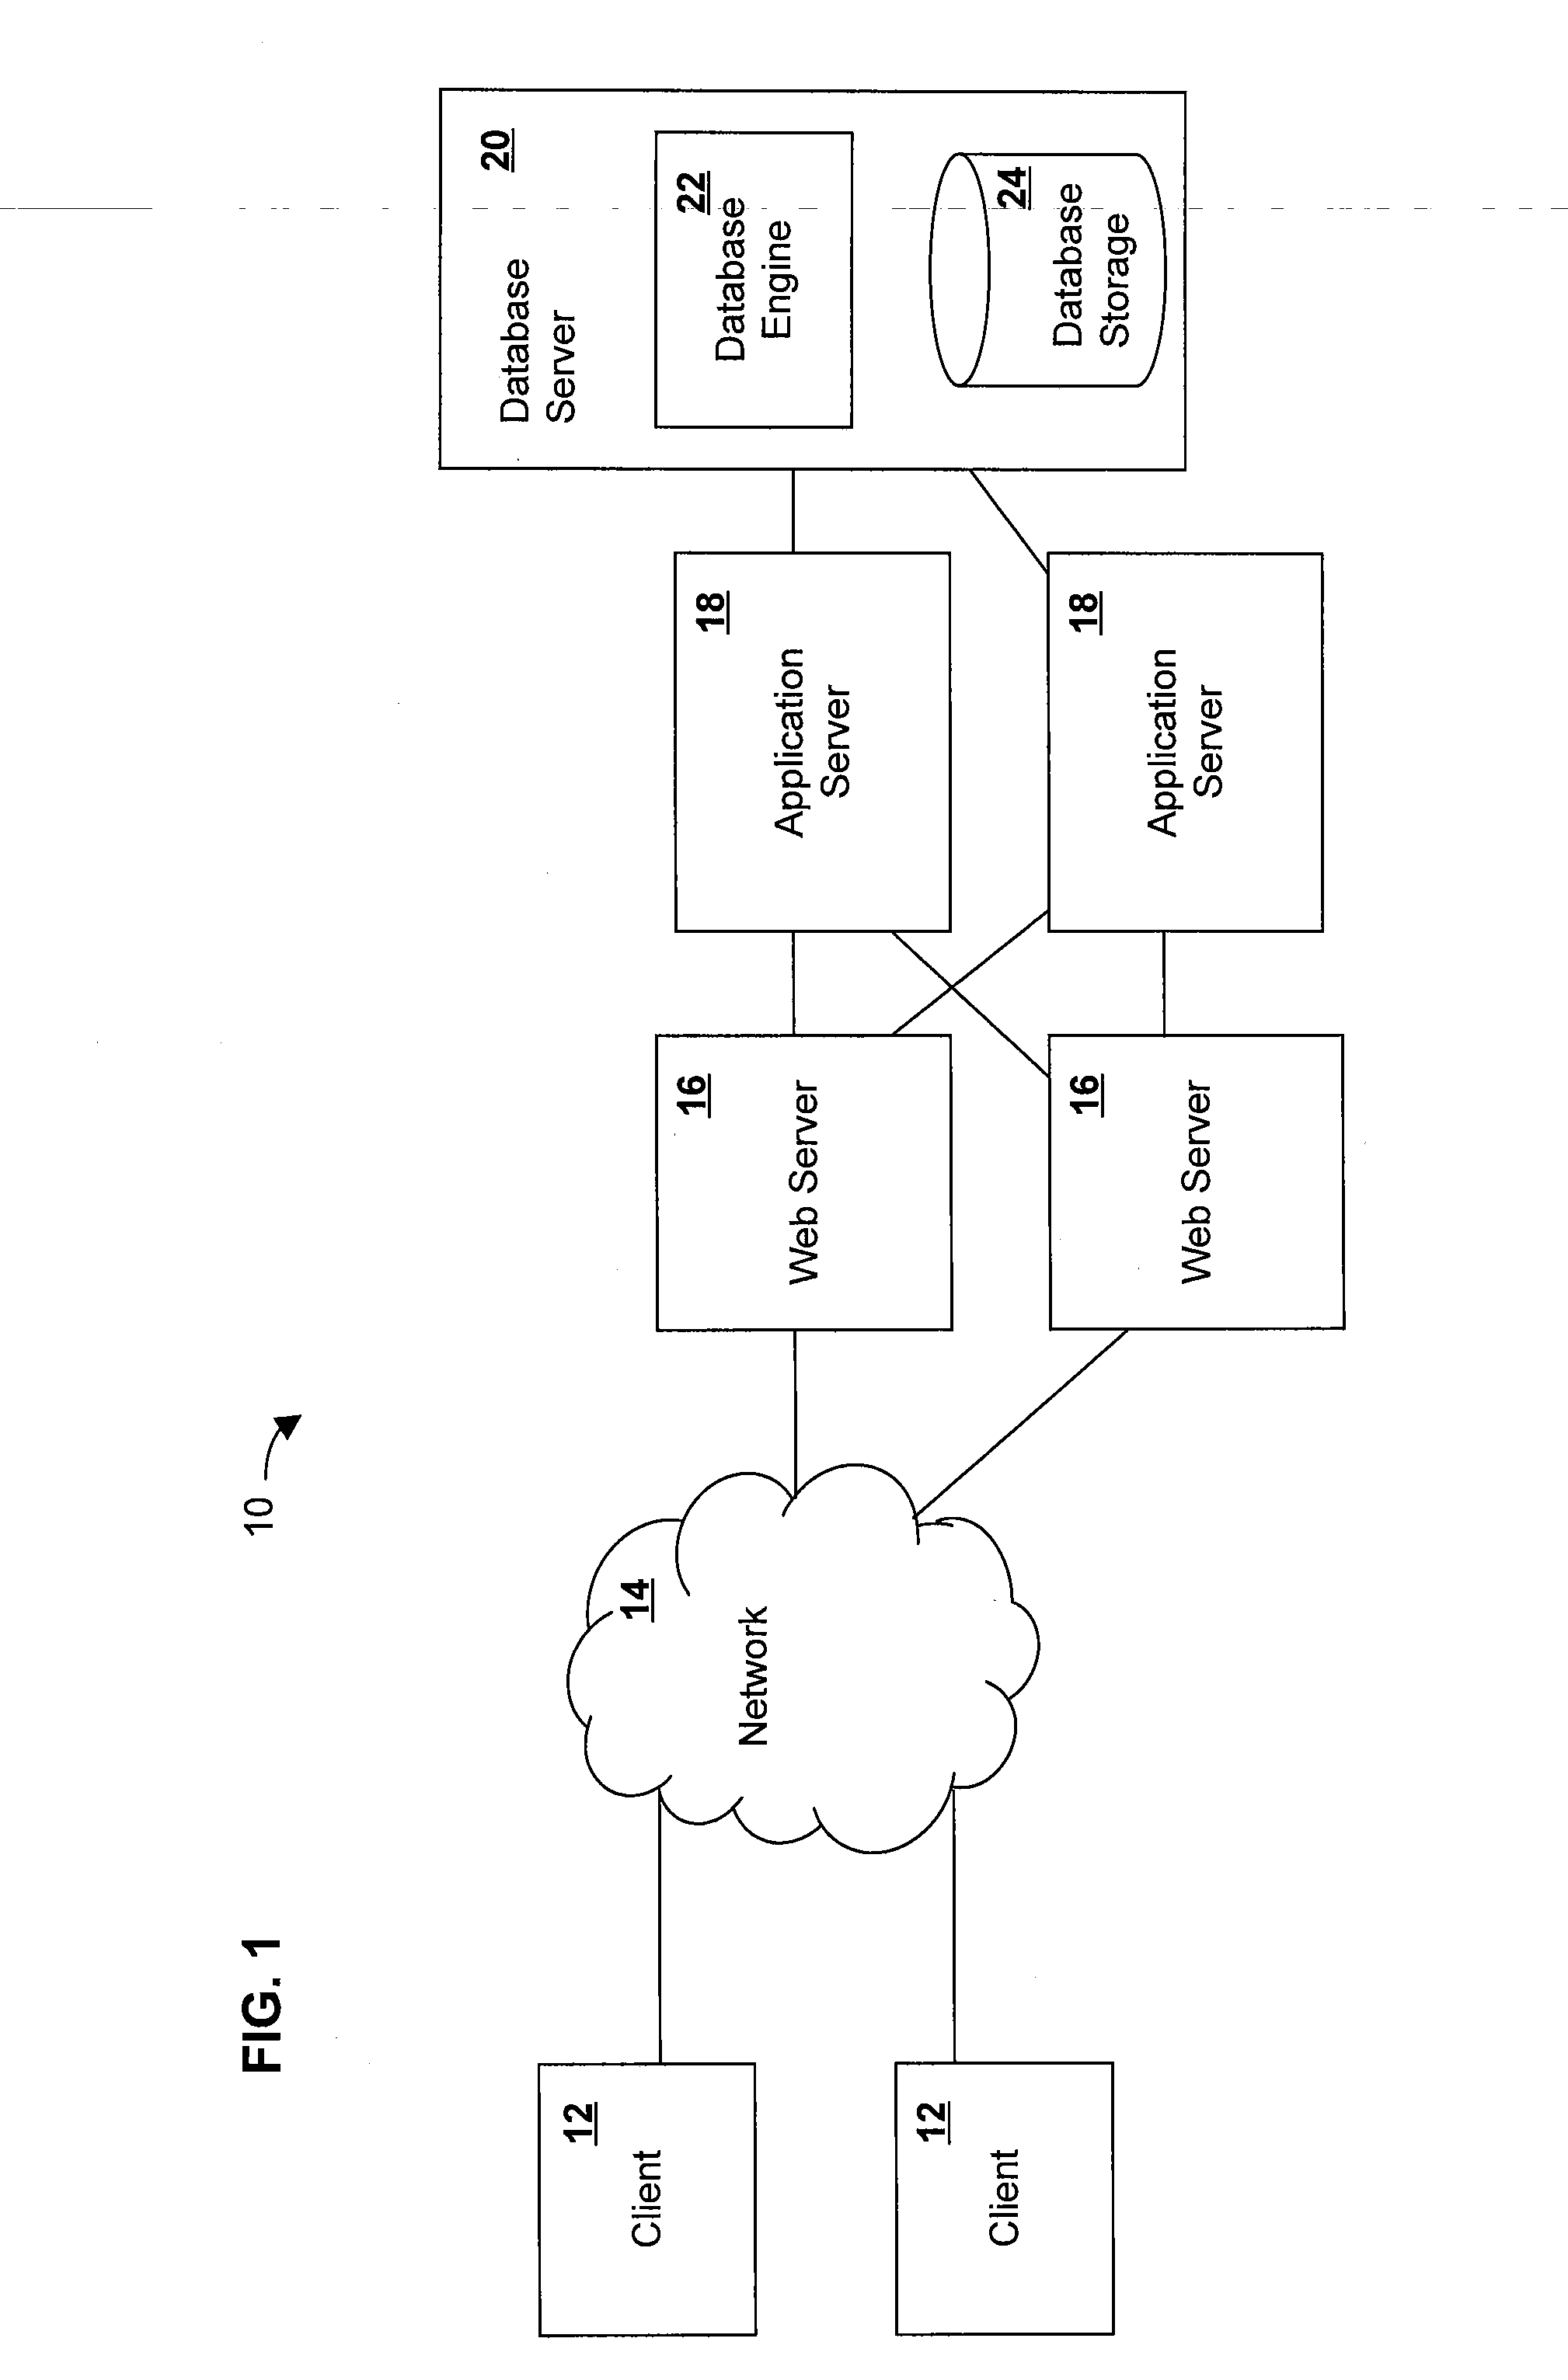 Method and System for Load Balancing a Distributed Database